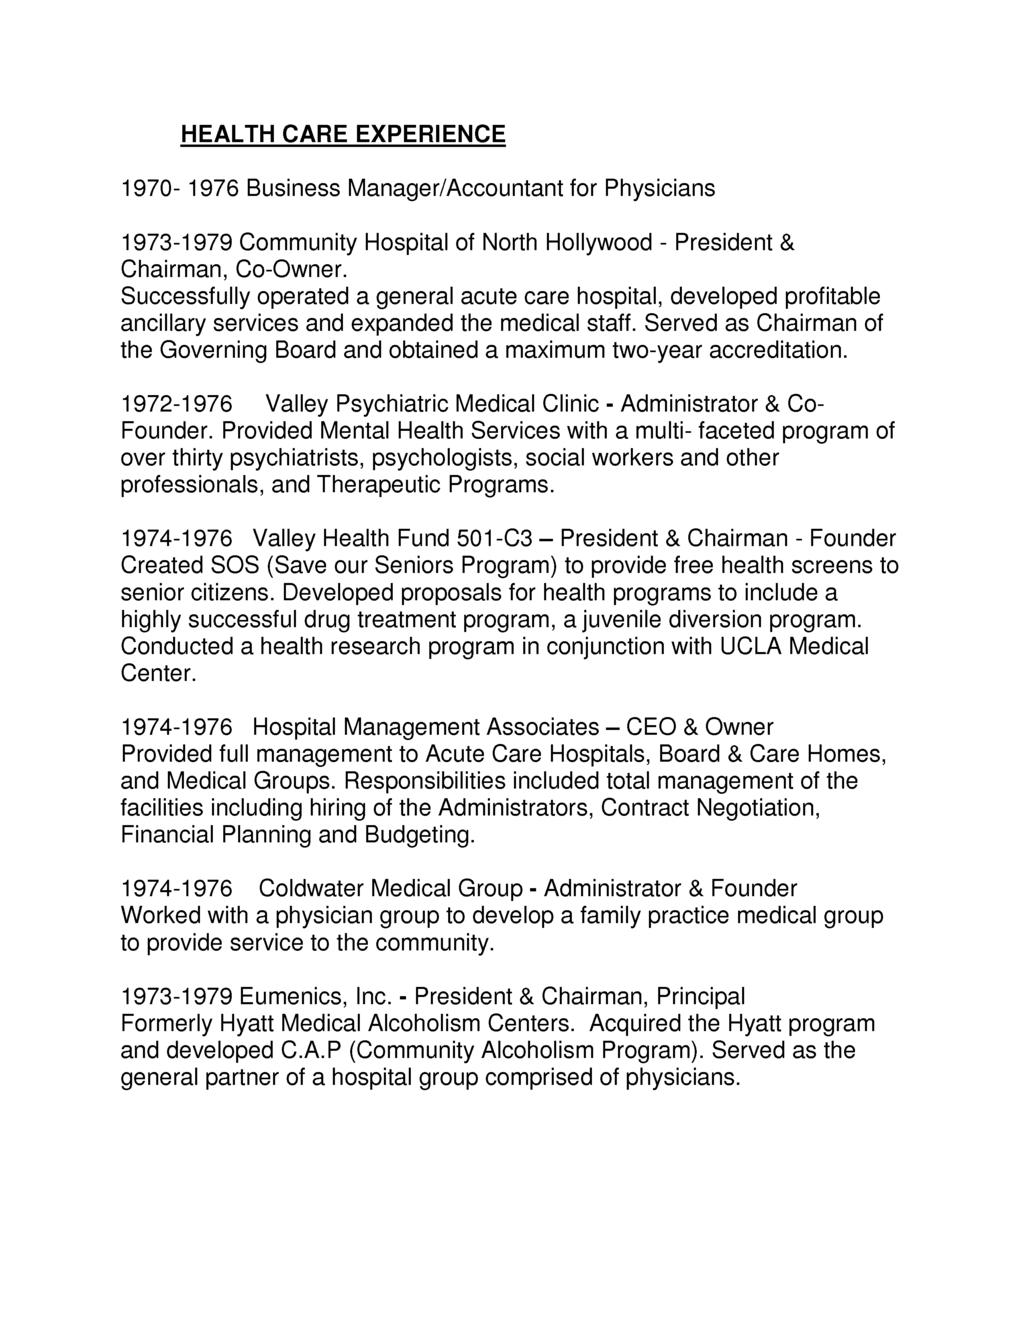 HEALTH CARE EXPERIENCE 1970-1976 Business Manager/Accountant for Physicians 1973-1979 Community Hospital of North Hollywood - President & Chairman, Co-Owner.